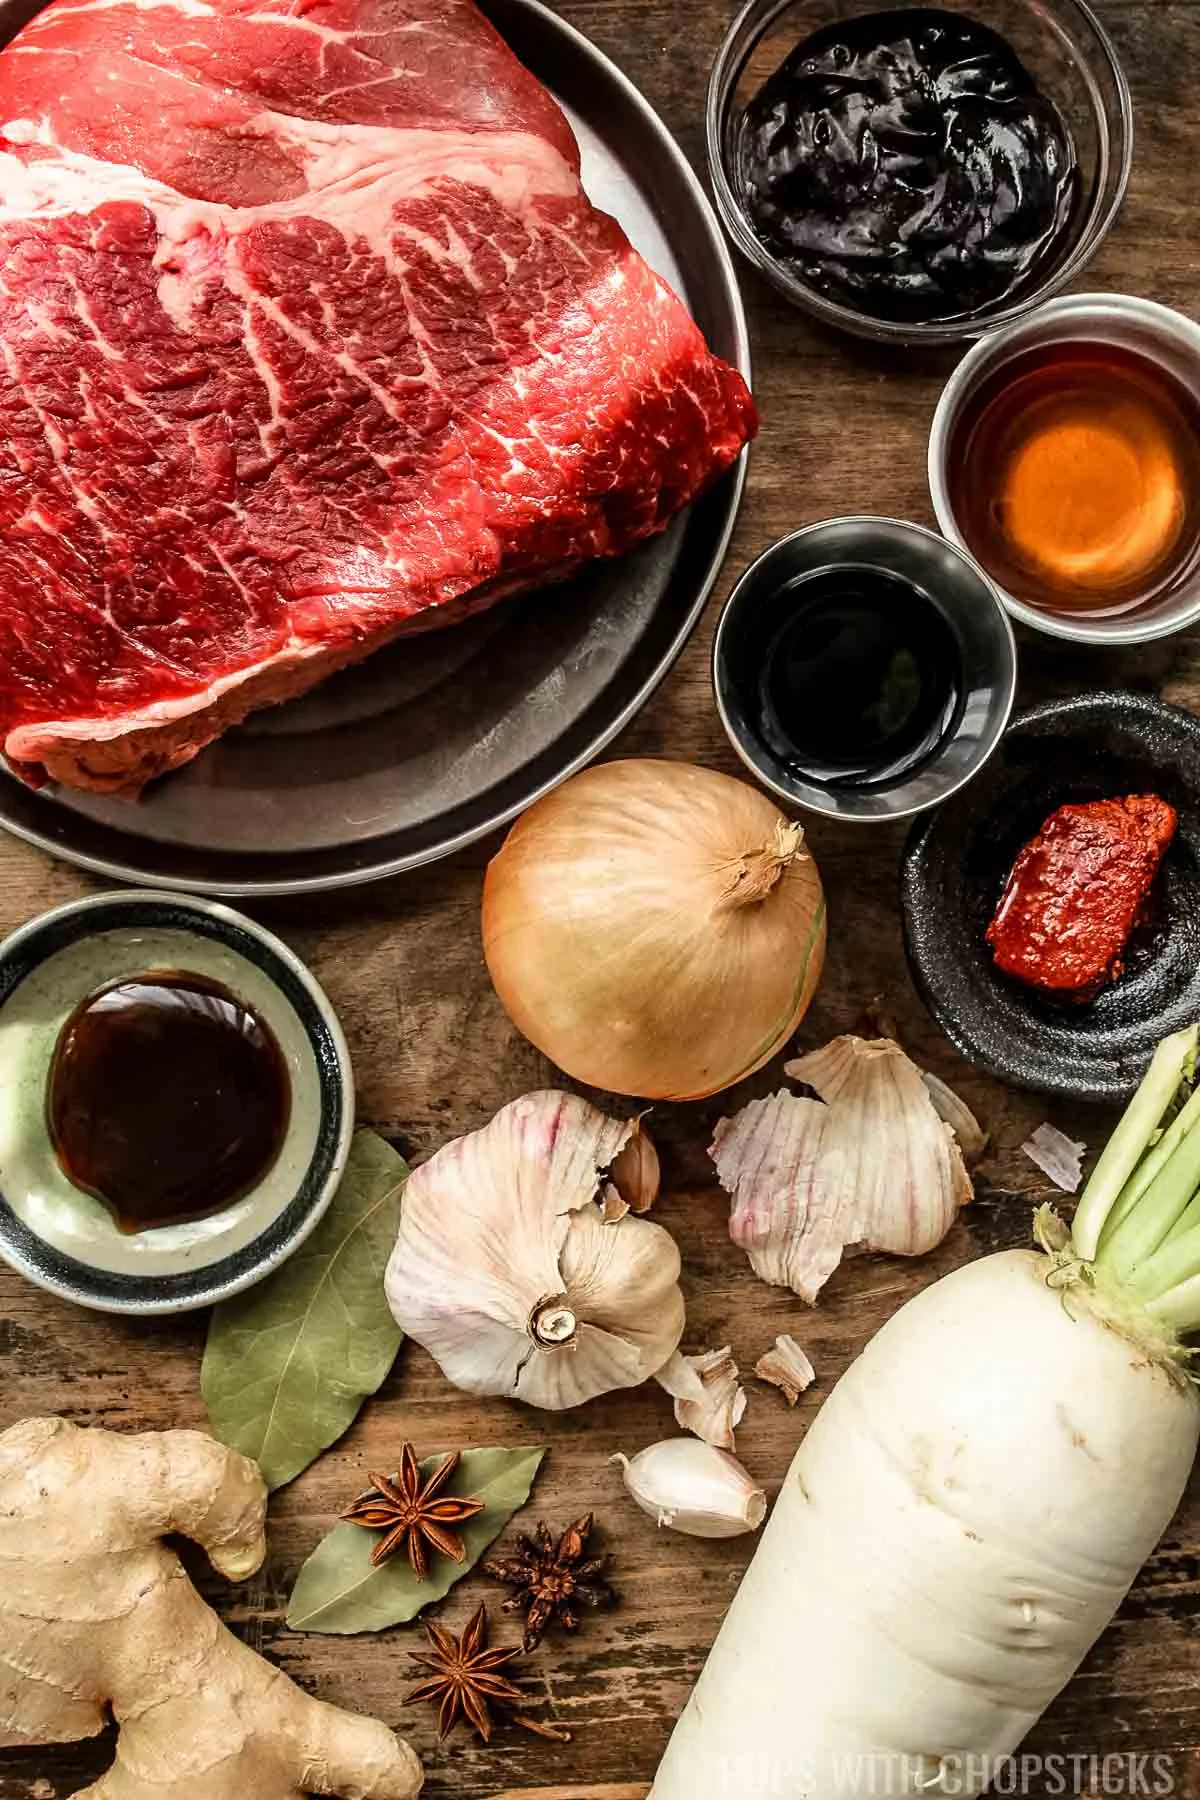 Ingredients for Chinese beef stew (beef steak, hoisin, oyster sauce, cooking wine, soy sauce, garlic, onion, star anise, bay leaves, daikon, ginger)